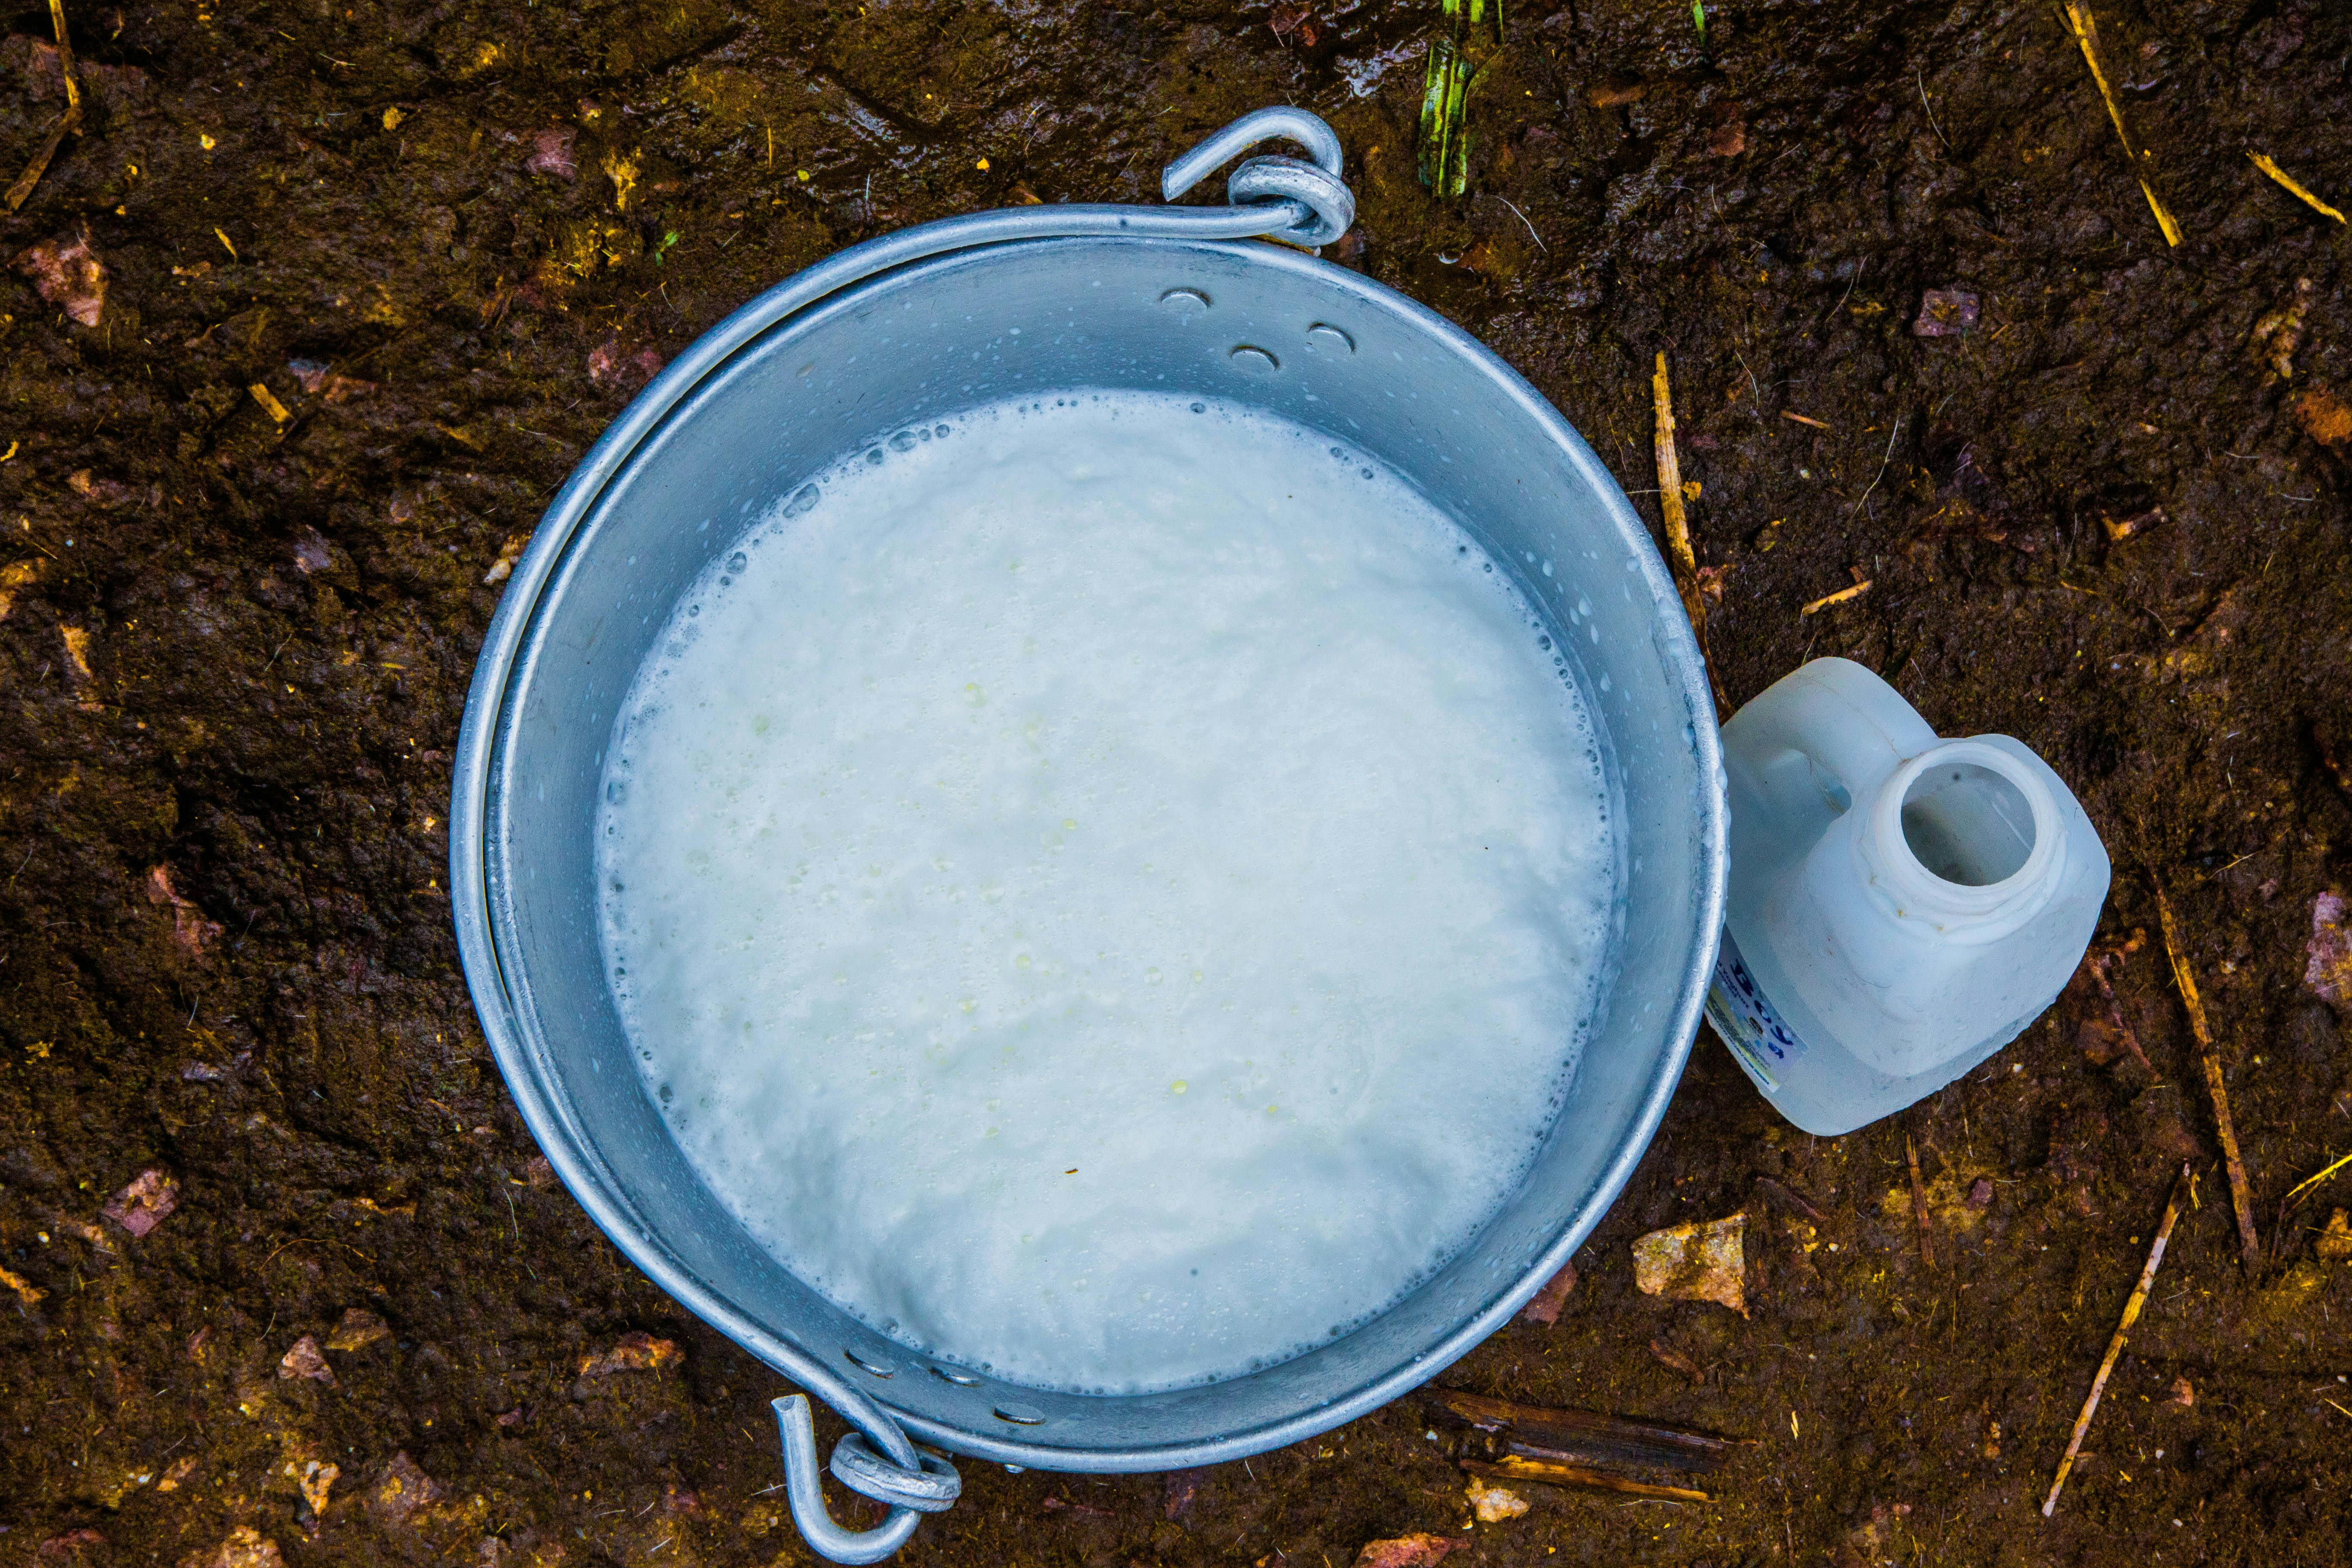 A bucket with soapy water | Source: Pexels